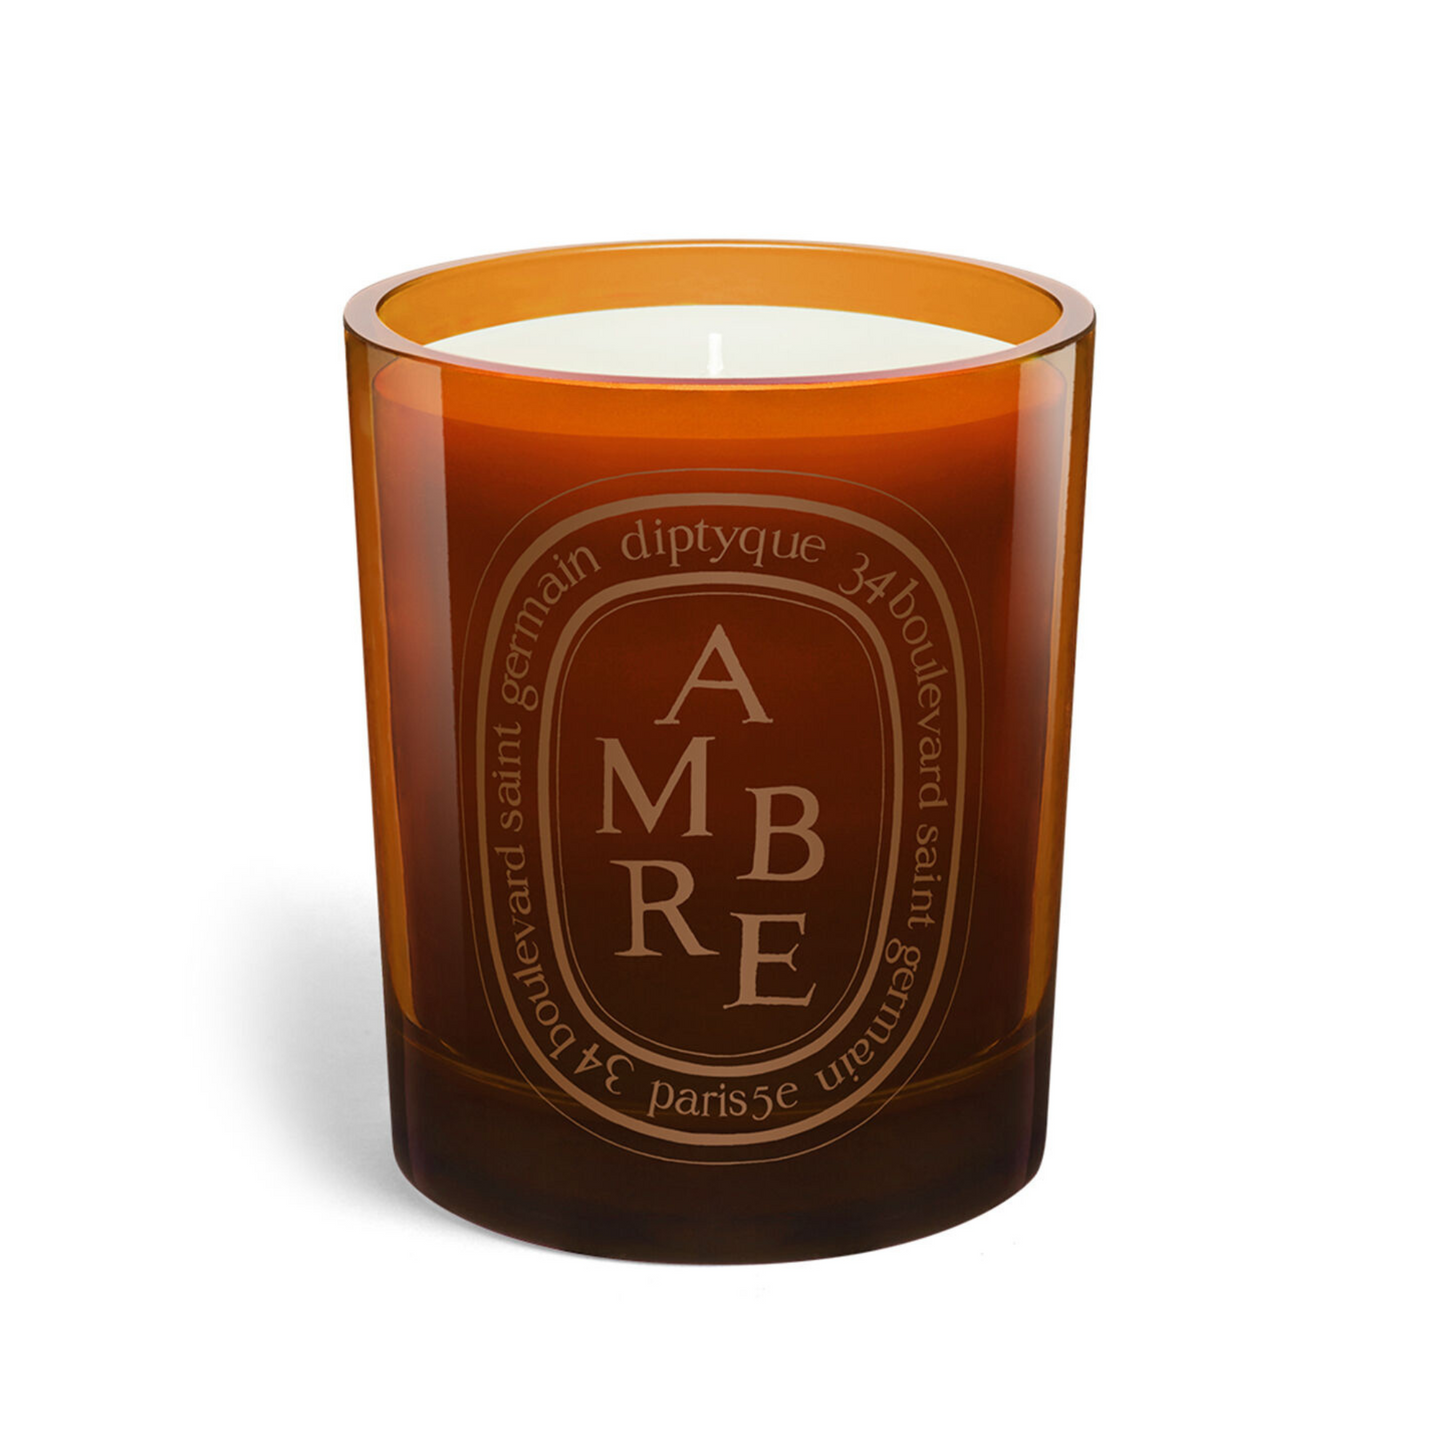 Primary Image of diptyque Paris Amber Candle (300 g) 